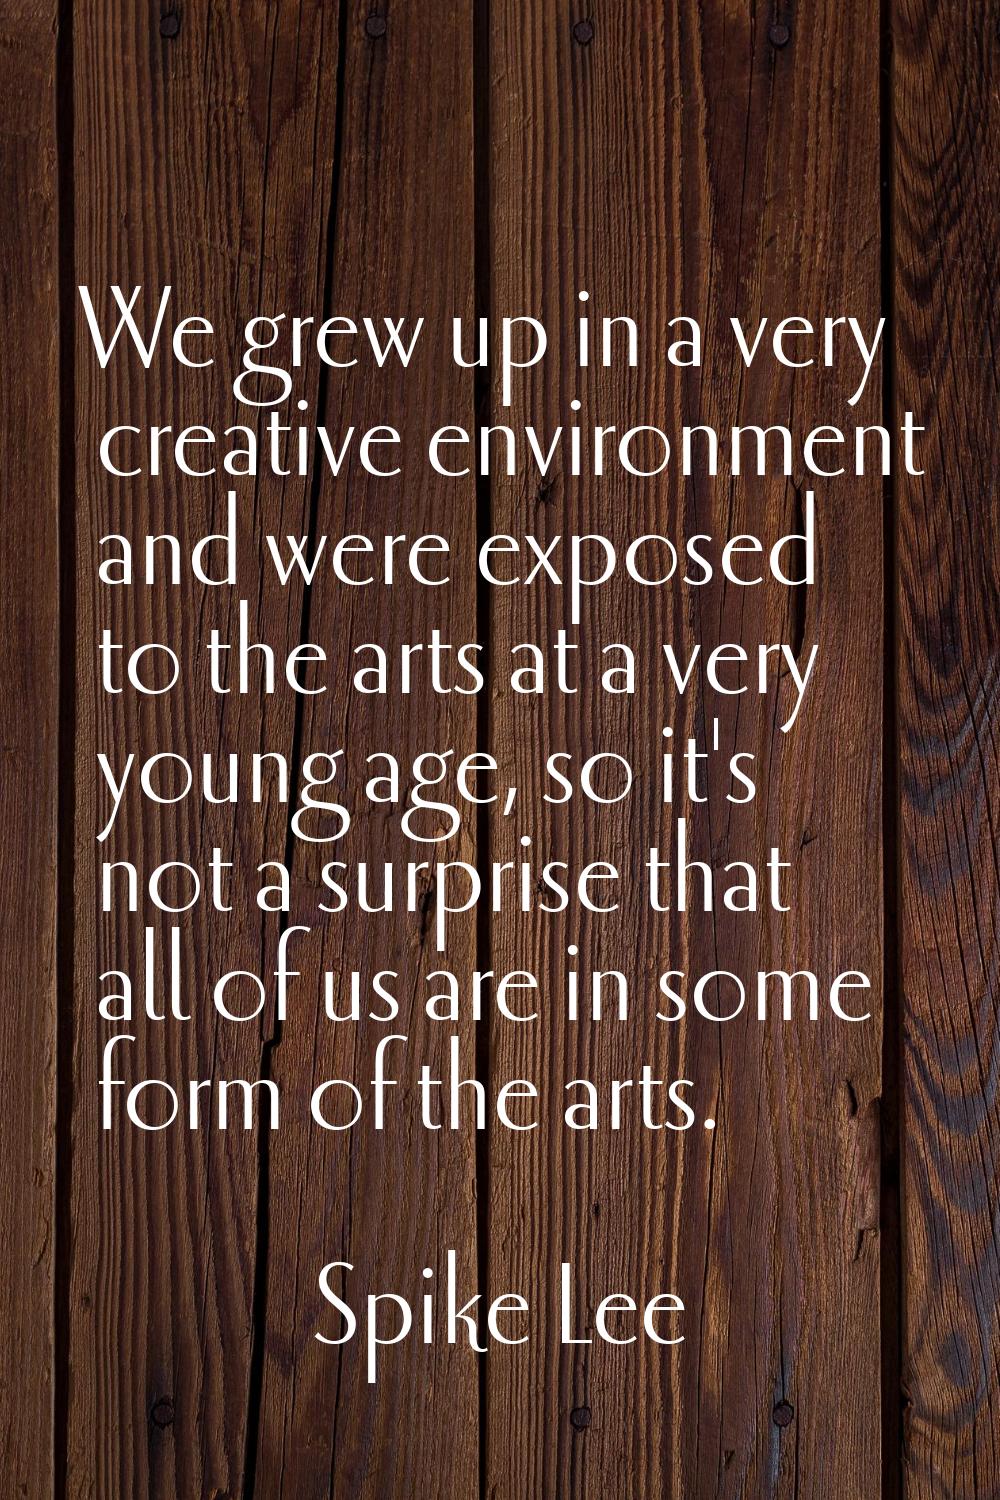 We grew up in a very creative environment and were exposed to the arts at a very young age, so it's